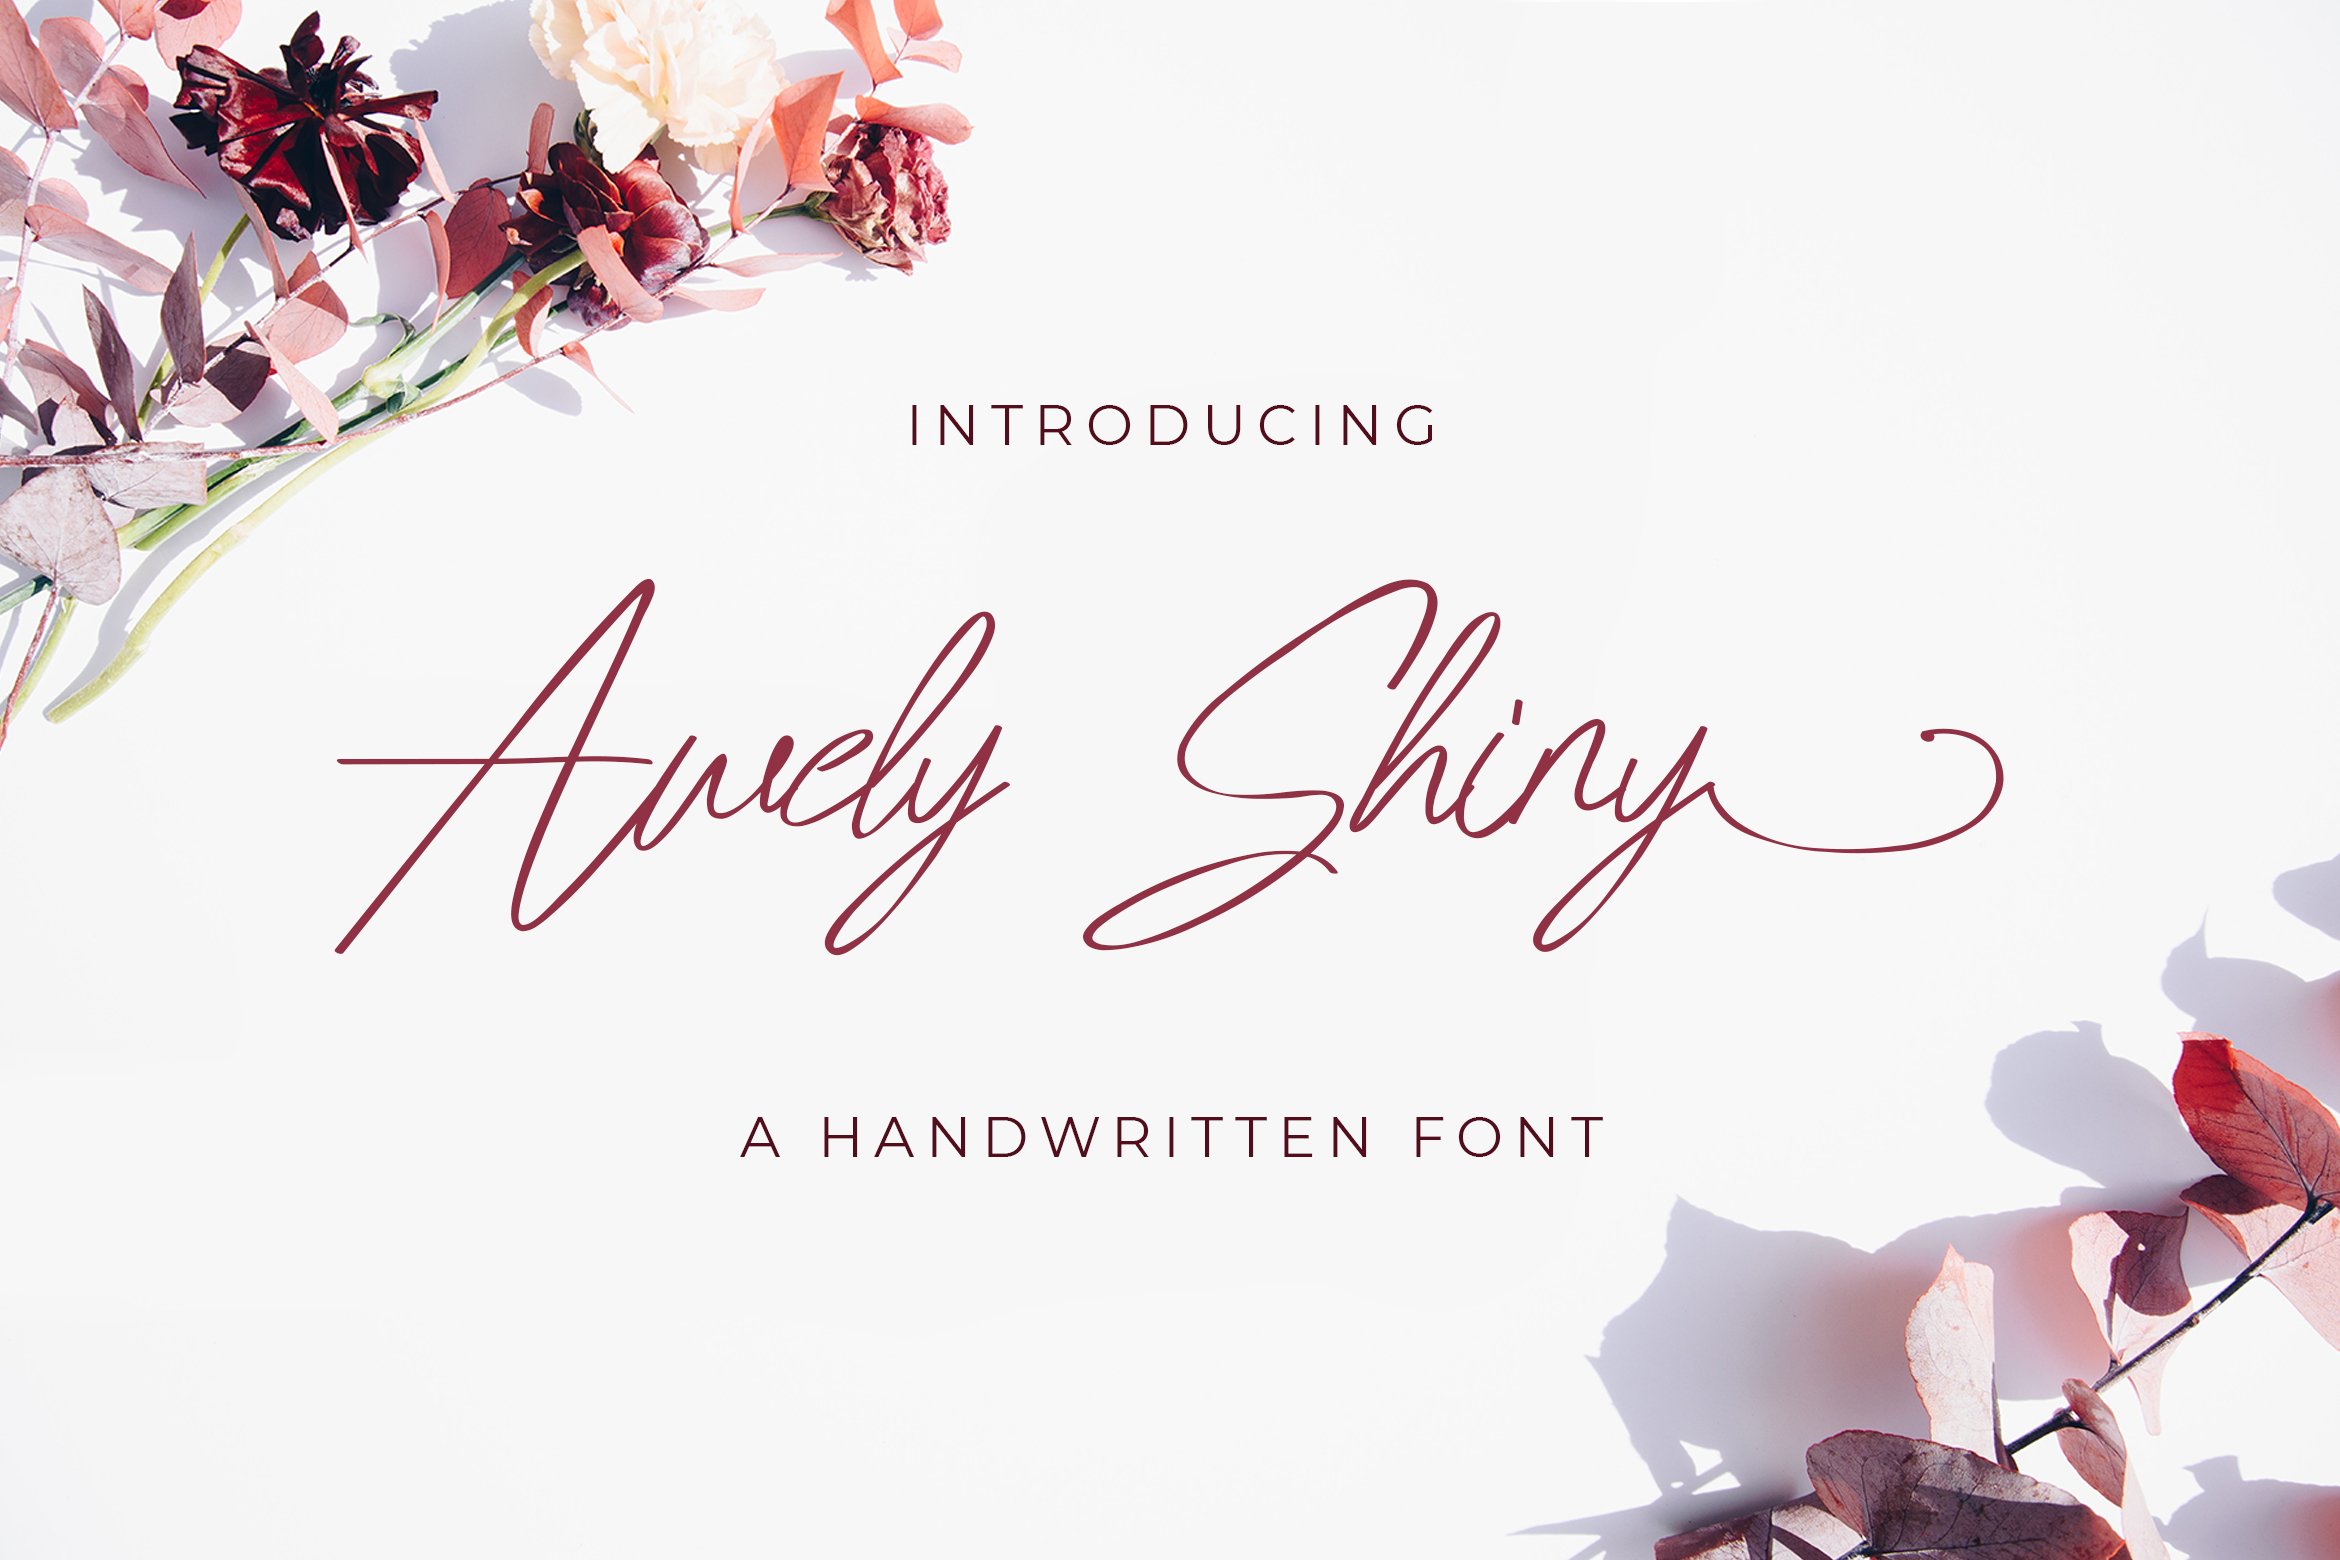 Awely Shiny - Handwritten Font cover image.